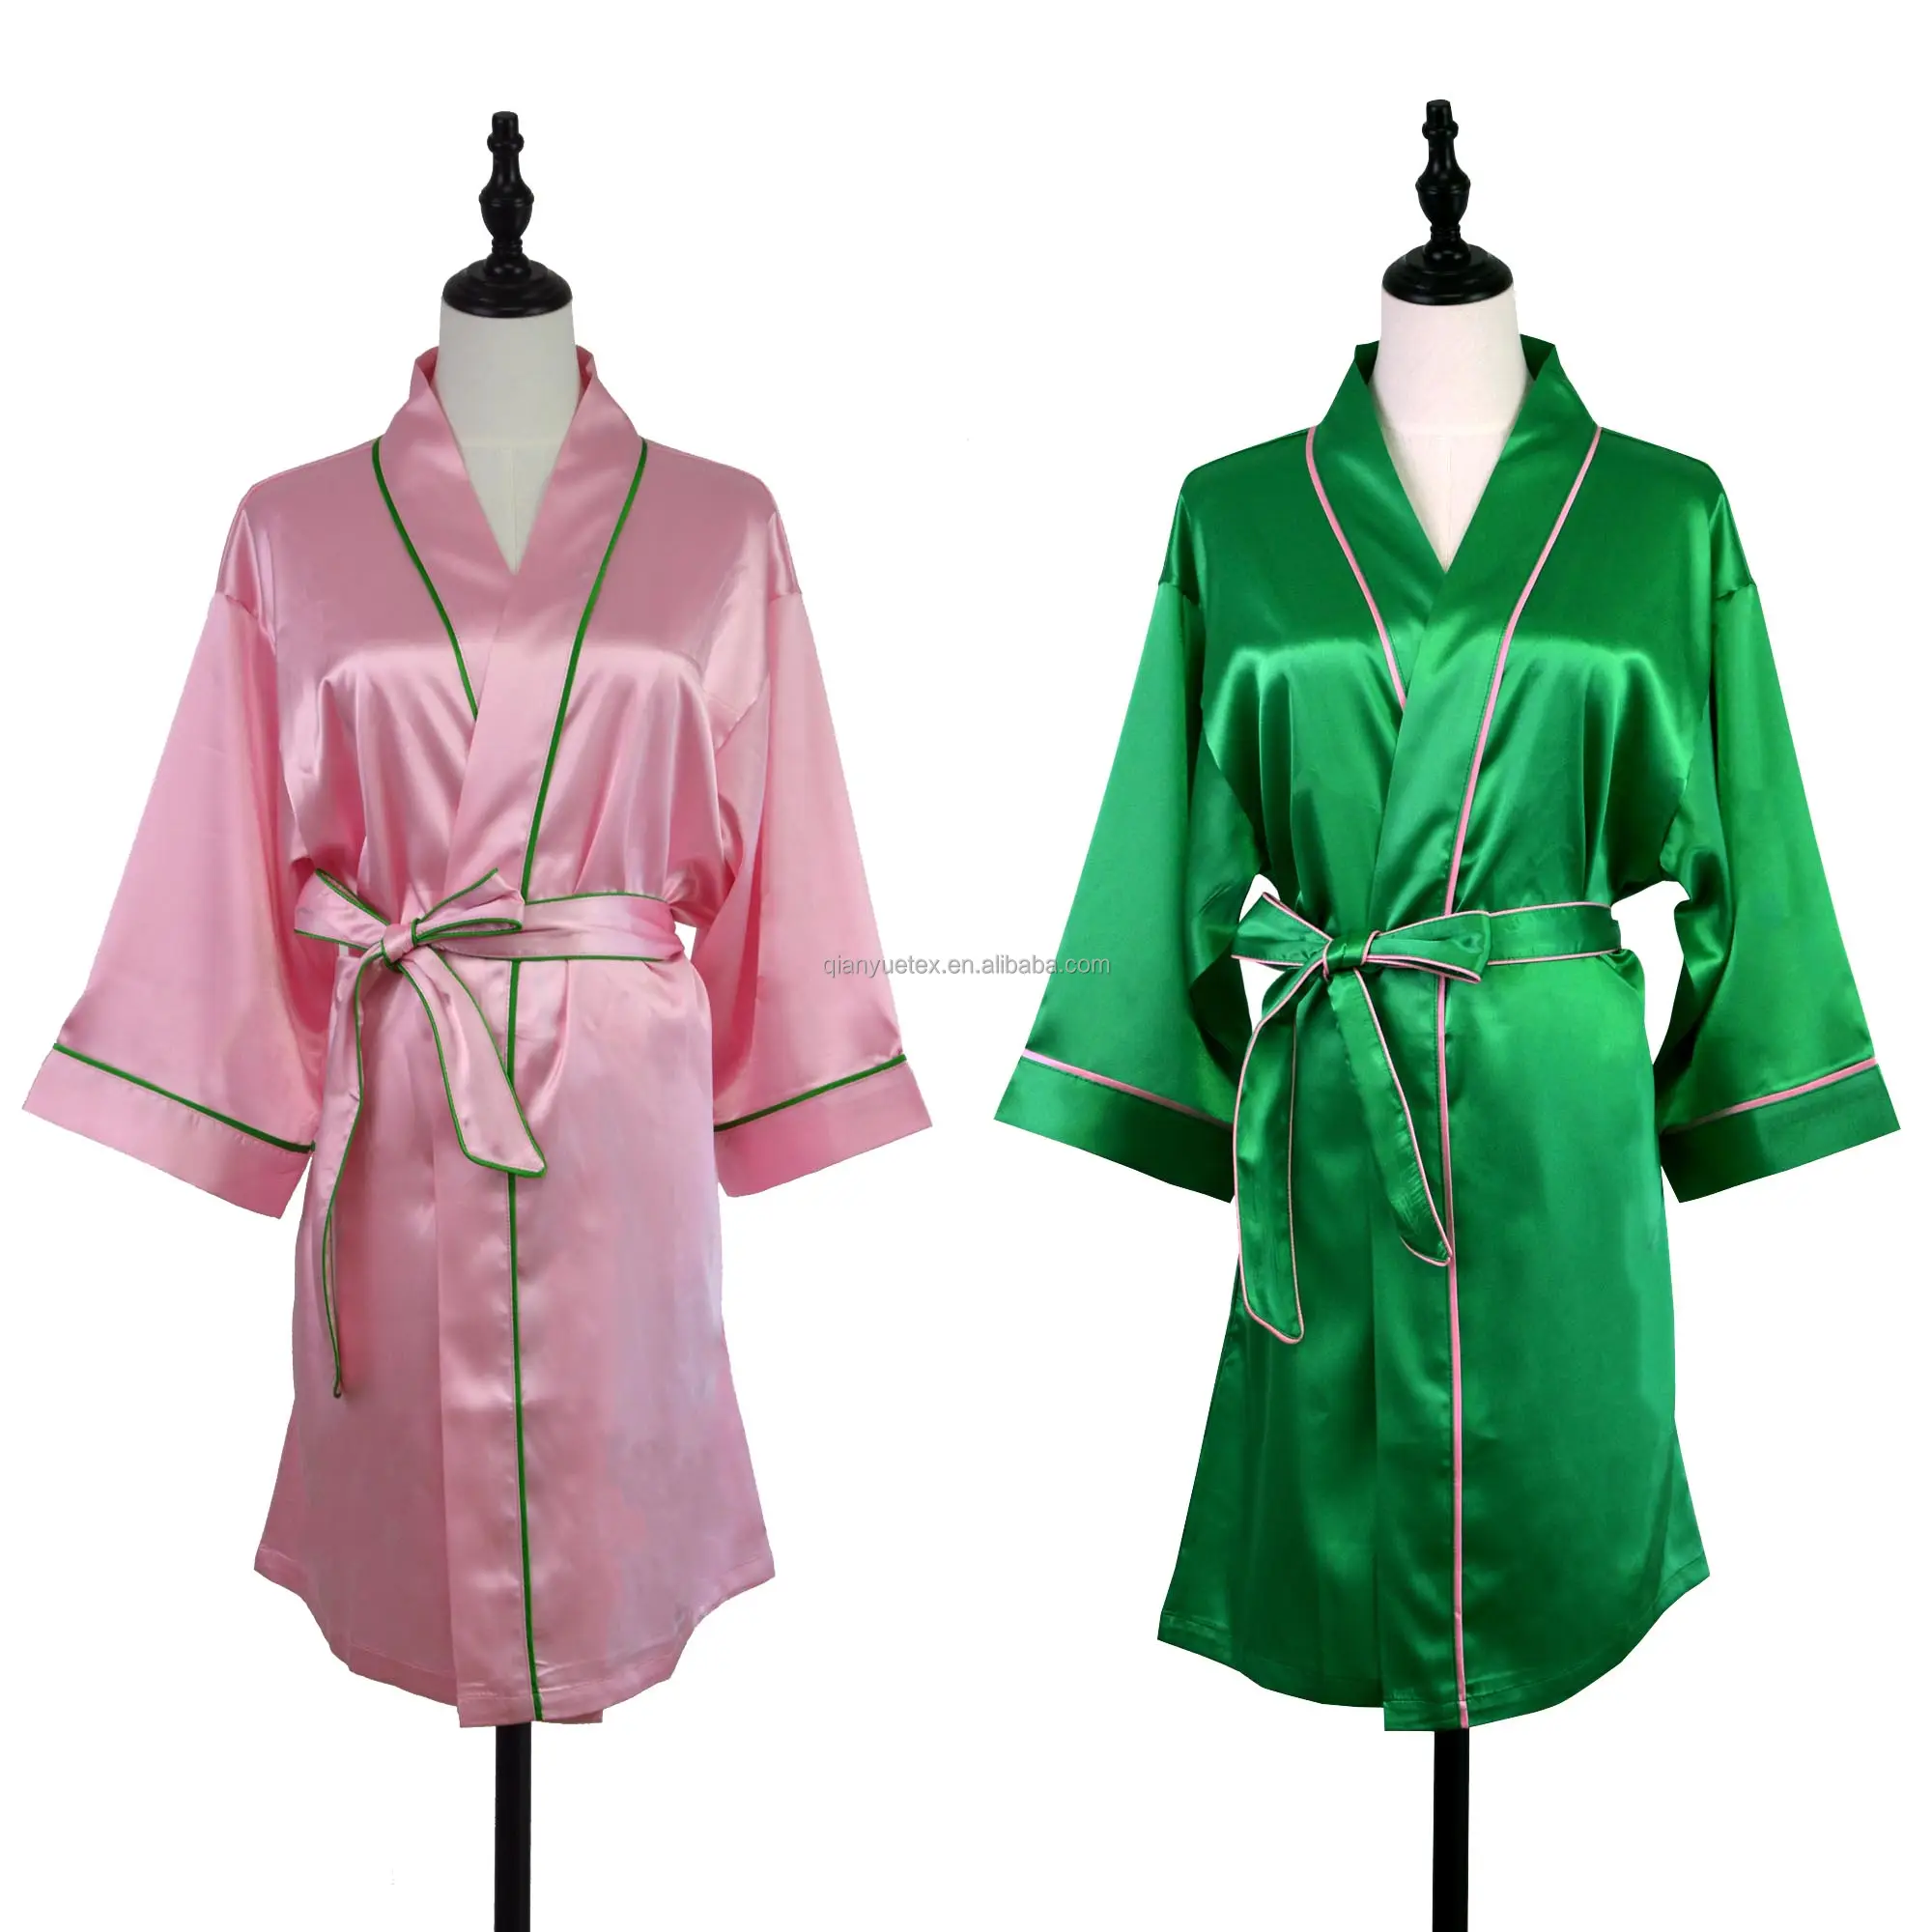 Wholesale and Custom Design High Quality with Piping and Pocket for Women Silk Satin Kimono Robes